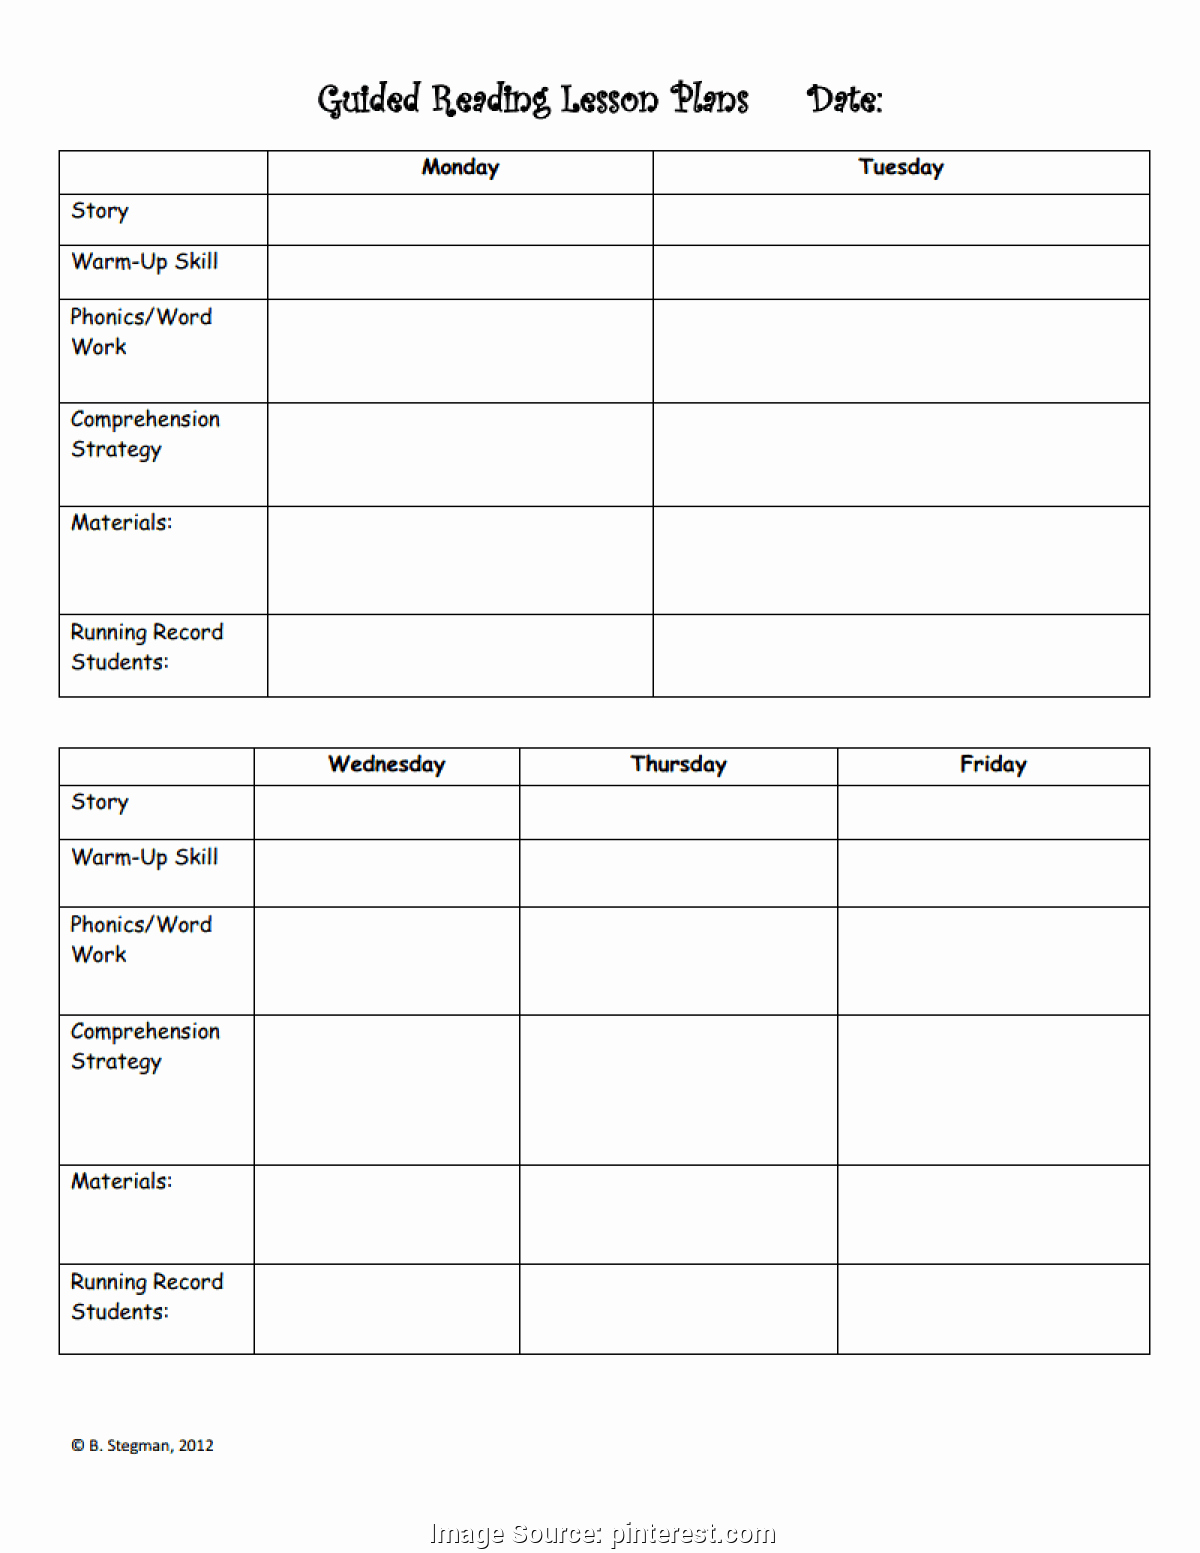 Guided Reading Template Pdf Awesome Guided Reading Template Pdf Never Underestimate the